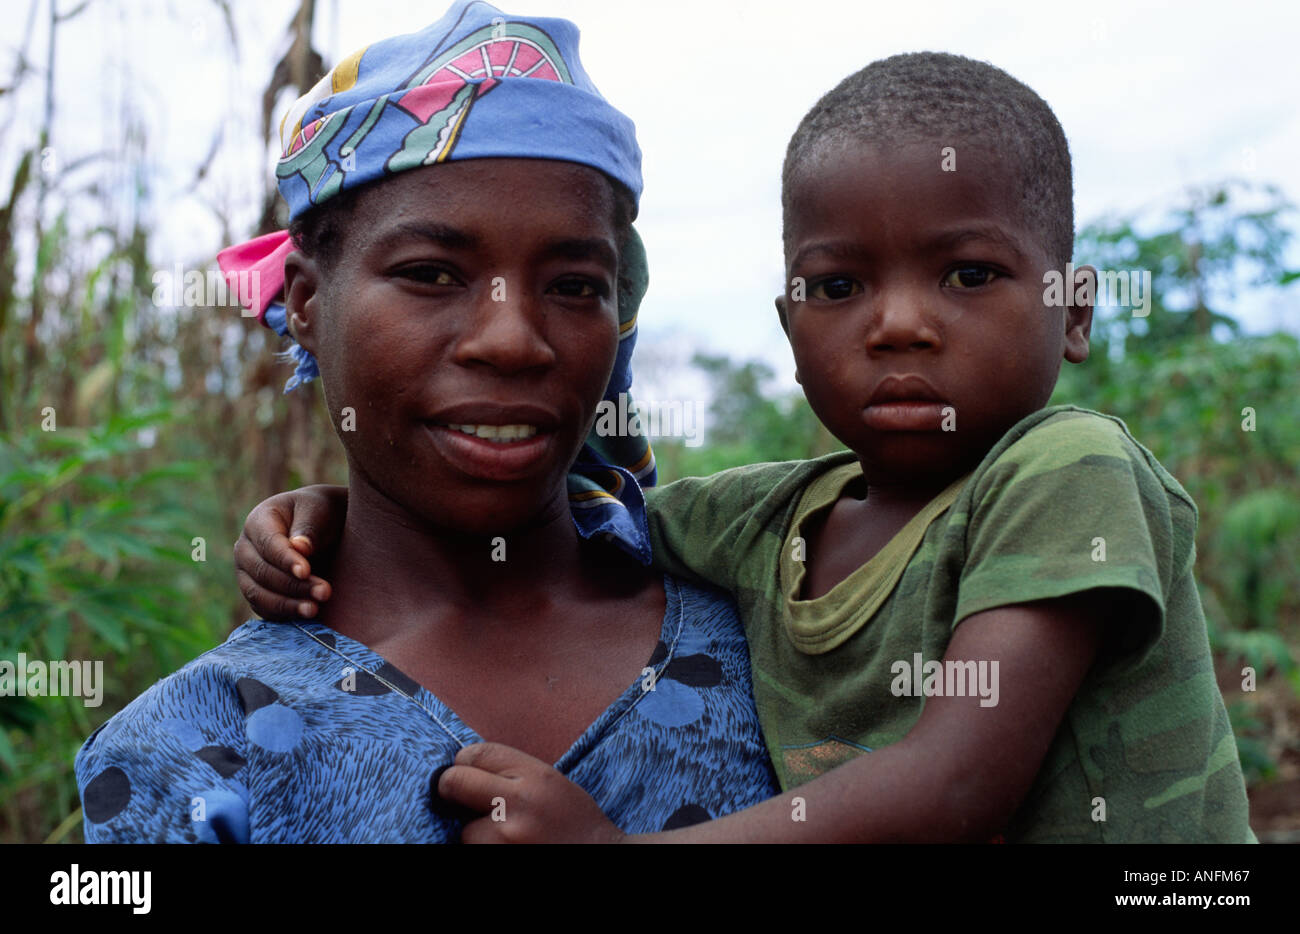 Landscape portrait of a poor mother and her child from a subsistence farming community in a remote rural part of Mozambique Stock Photo